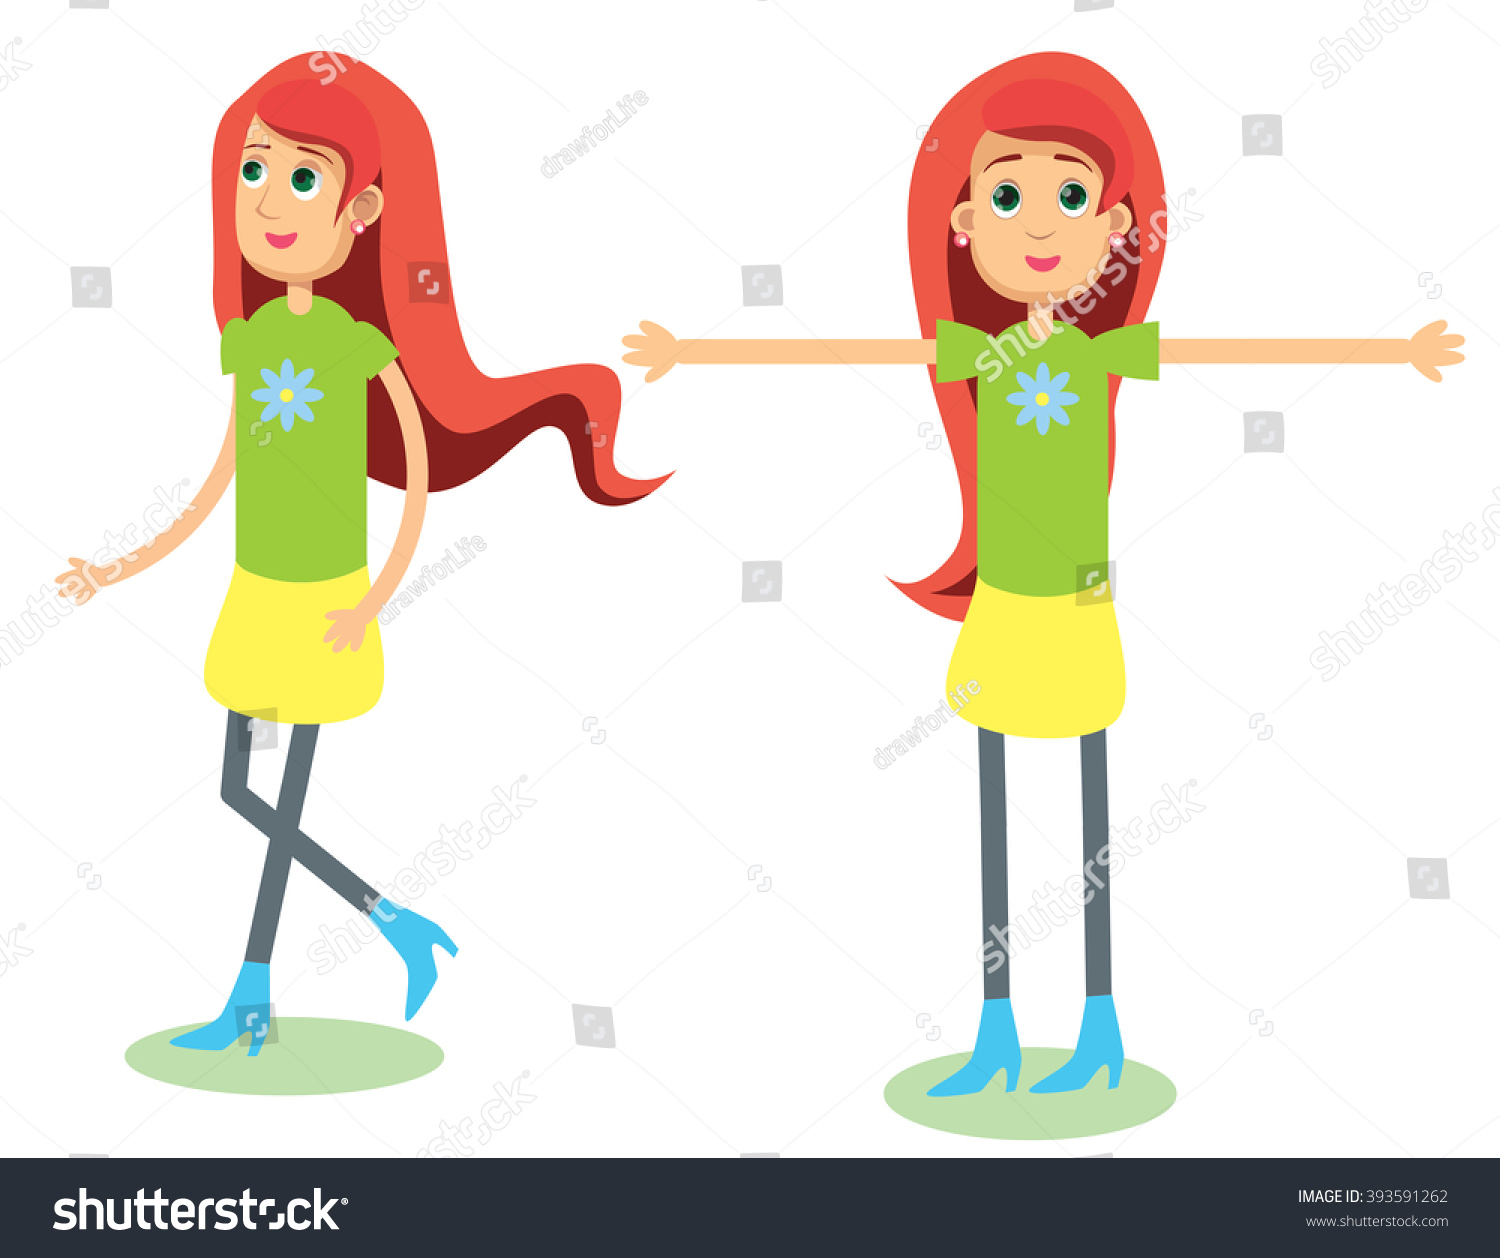 SVG of Girl with red hair. Girl walking. Girls stand. Girls for animation movie. Vector girl for animation cartoon. Animation, cartoon, girls, clothes, movie, life.  svg